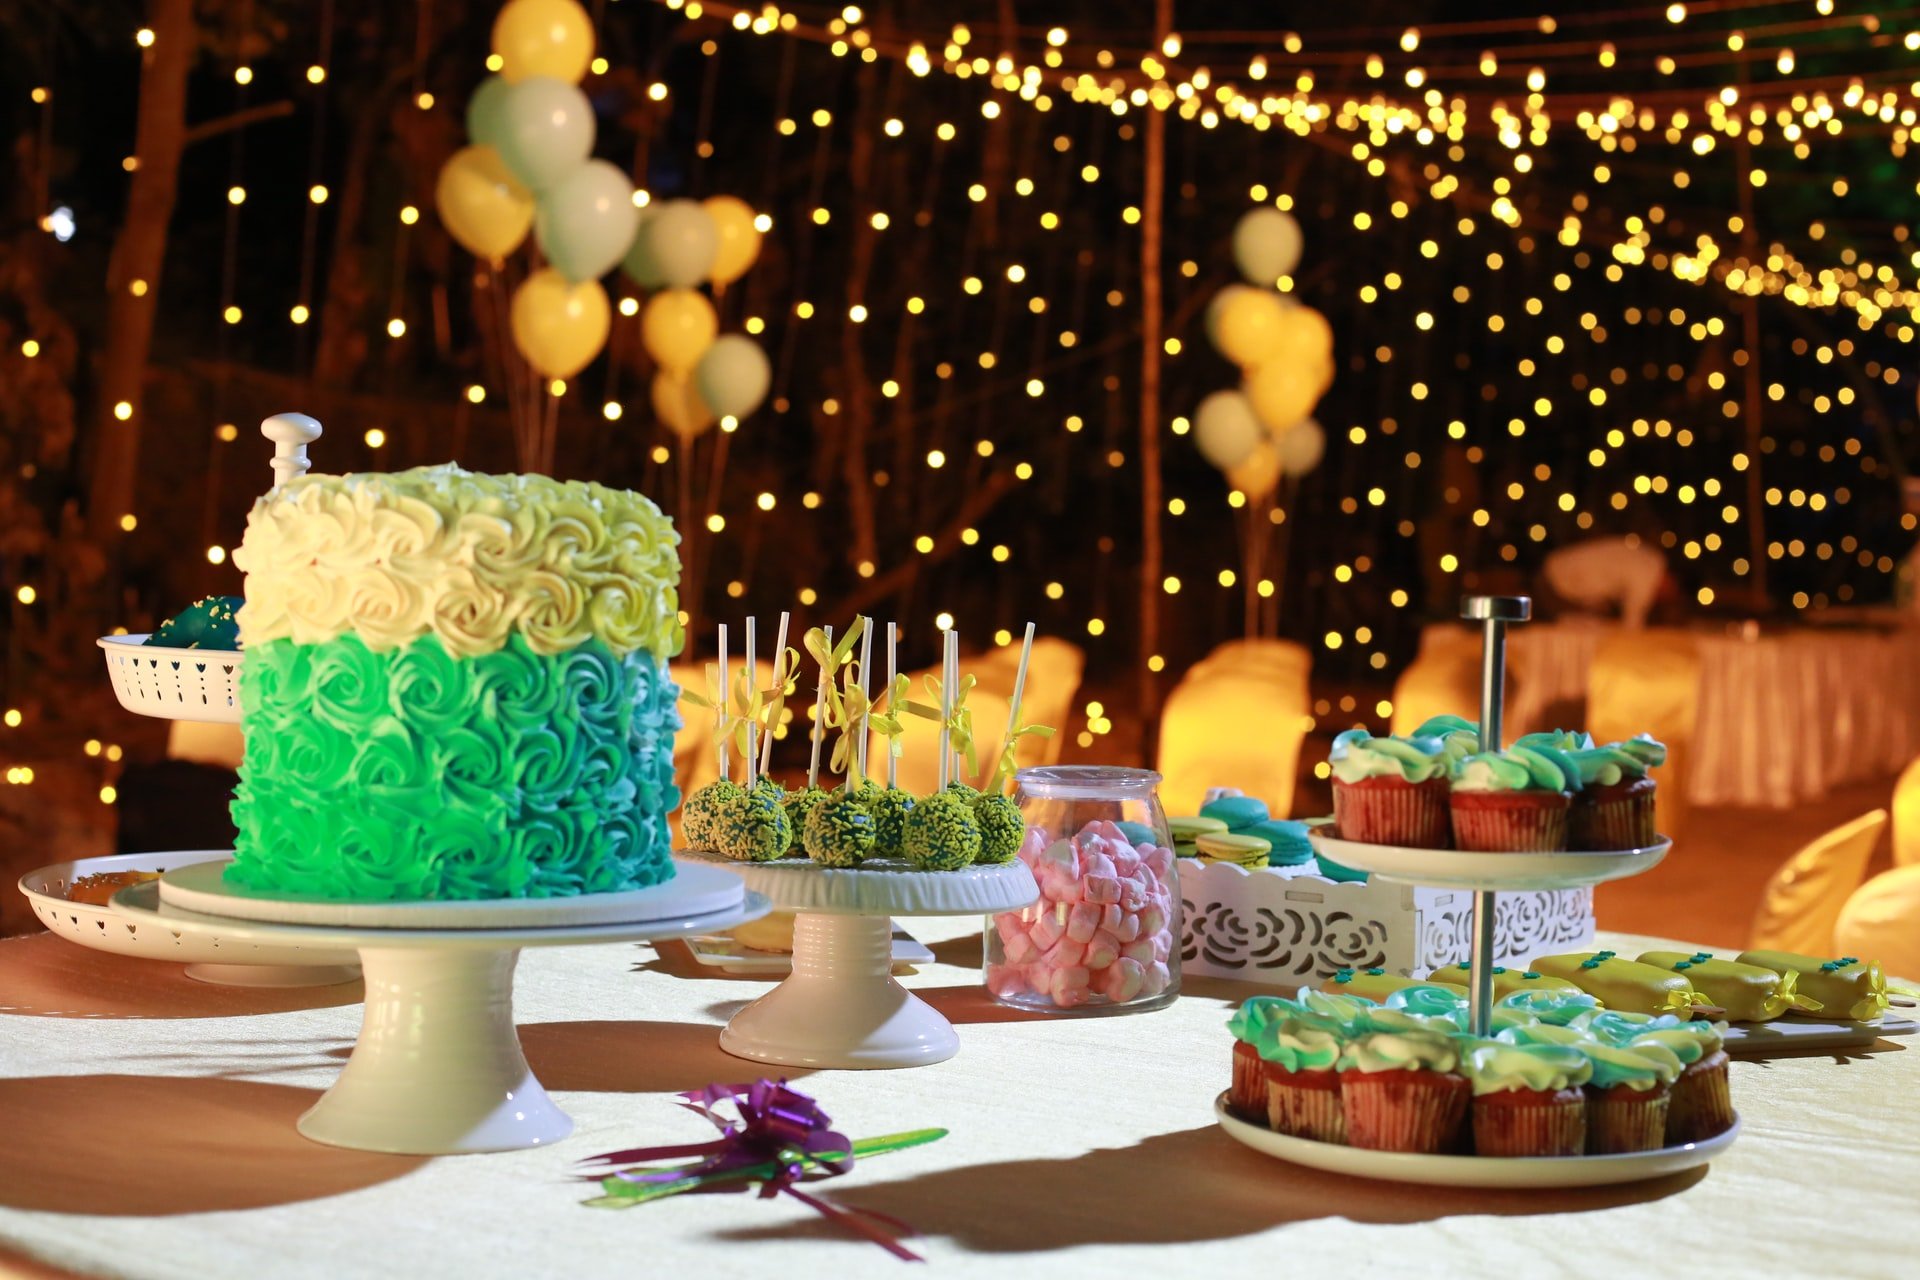 OP's mother threw a grand birthday party. | Source: Unsplash